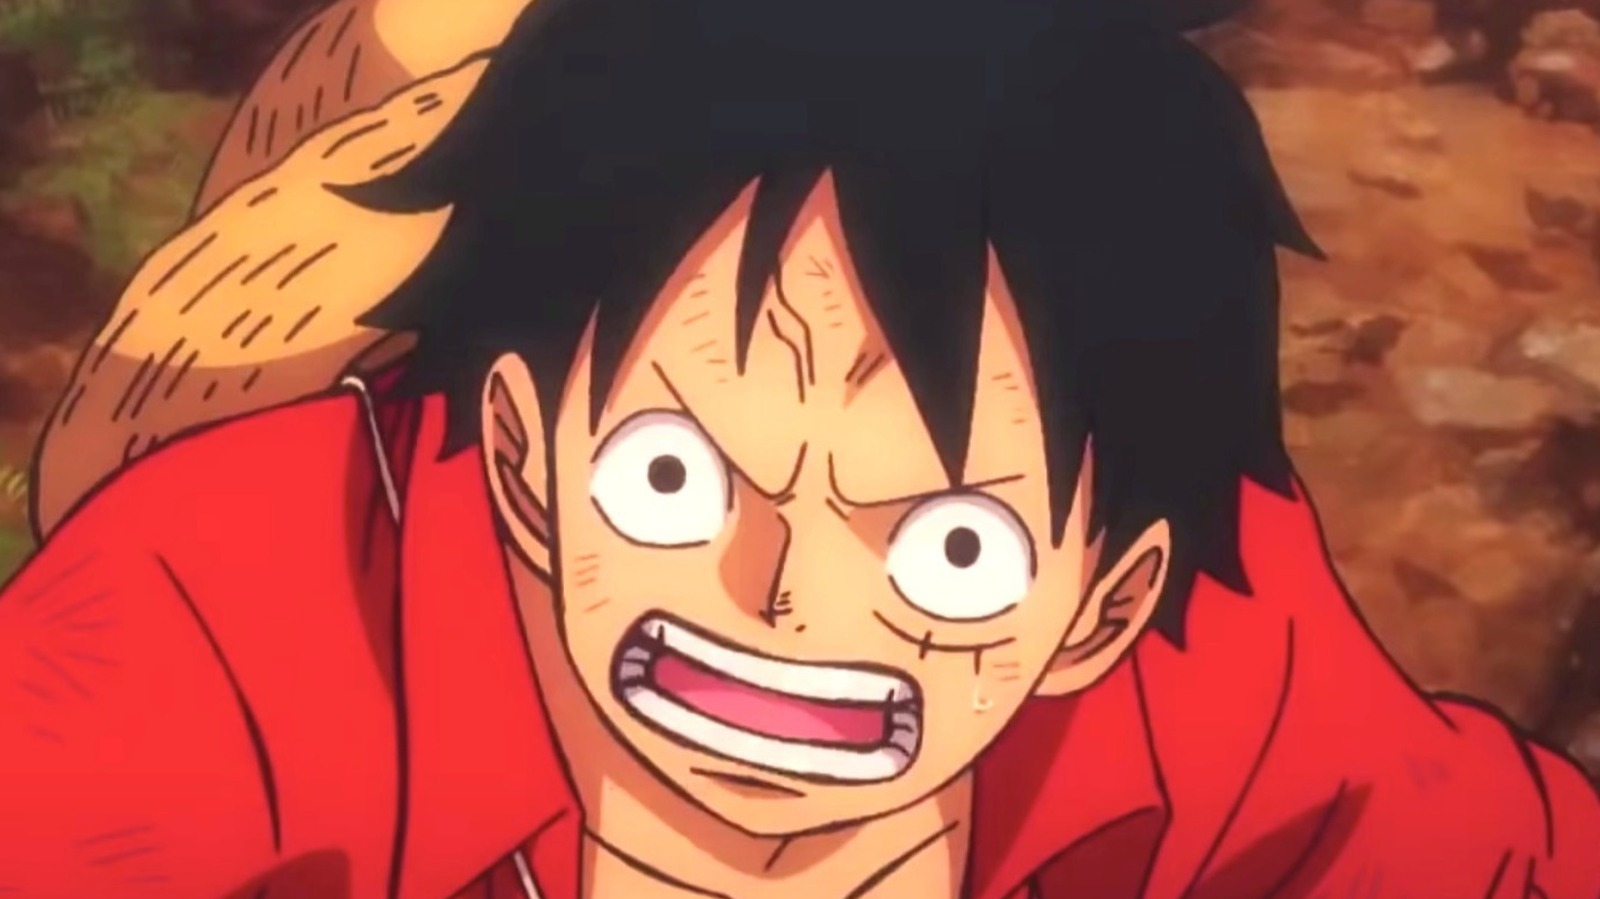 One Piece's voice actors reveal their thoughts on the live-action